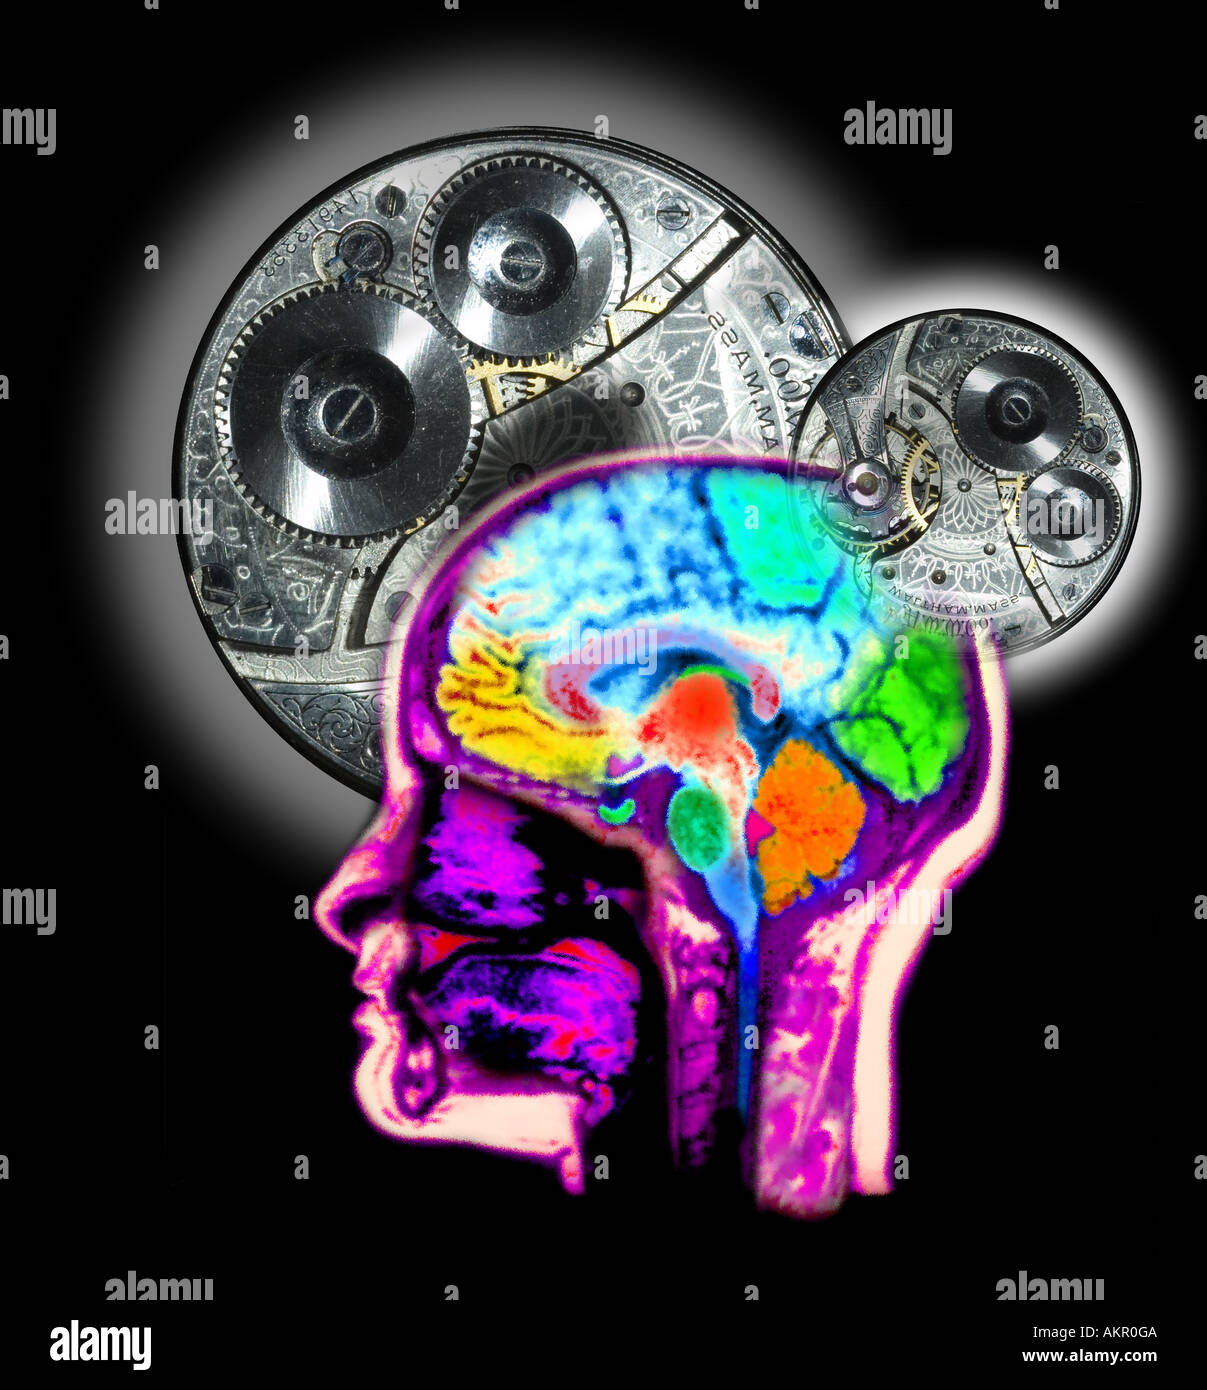 Magnetic resonance scan MRI of the head computer enhanced and colorized to show the normal anatomy of the brain and head overlai Stock Photo